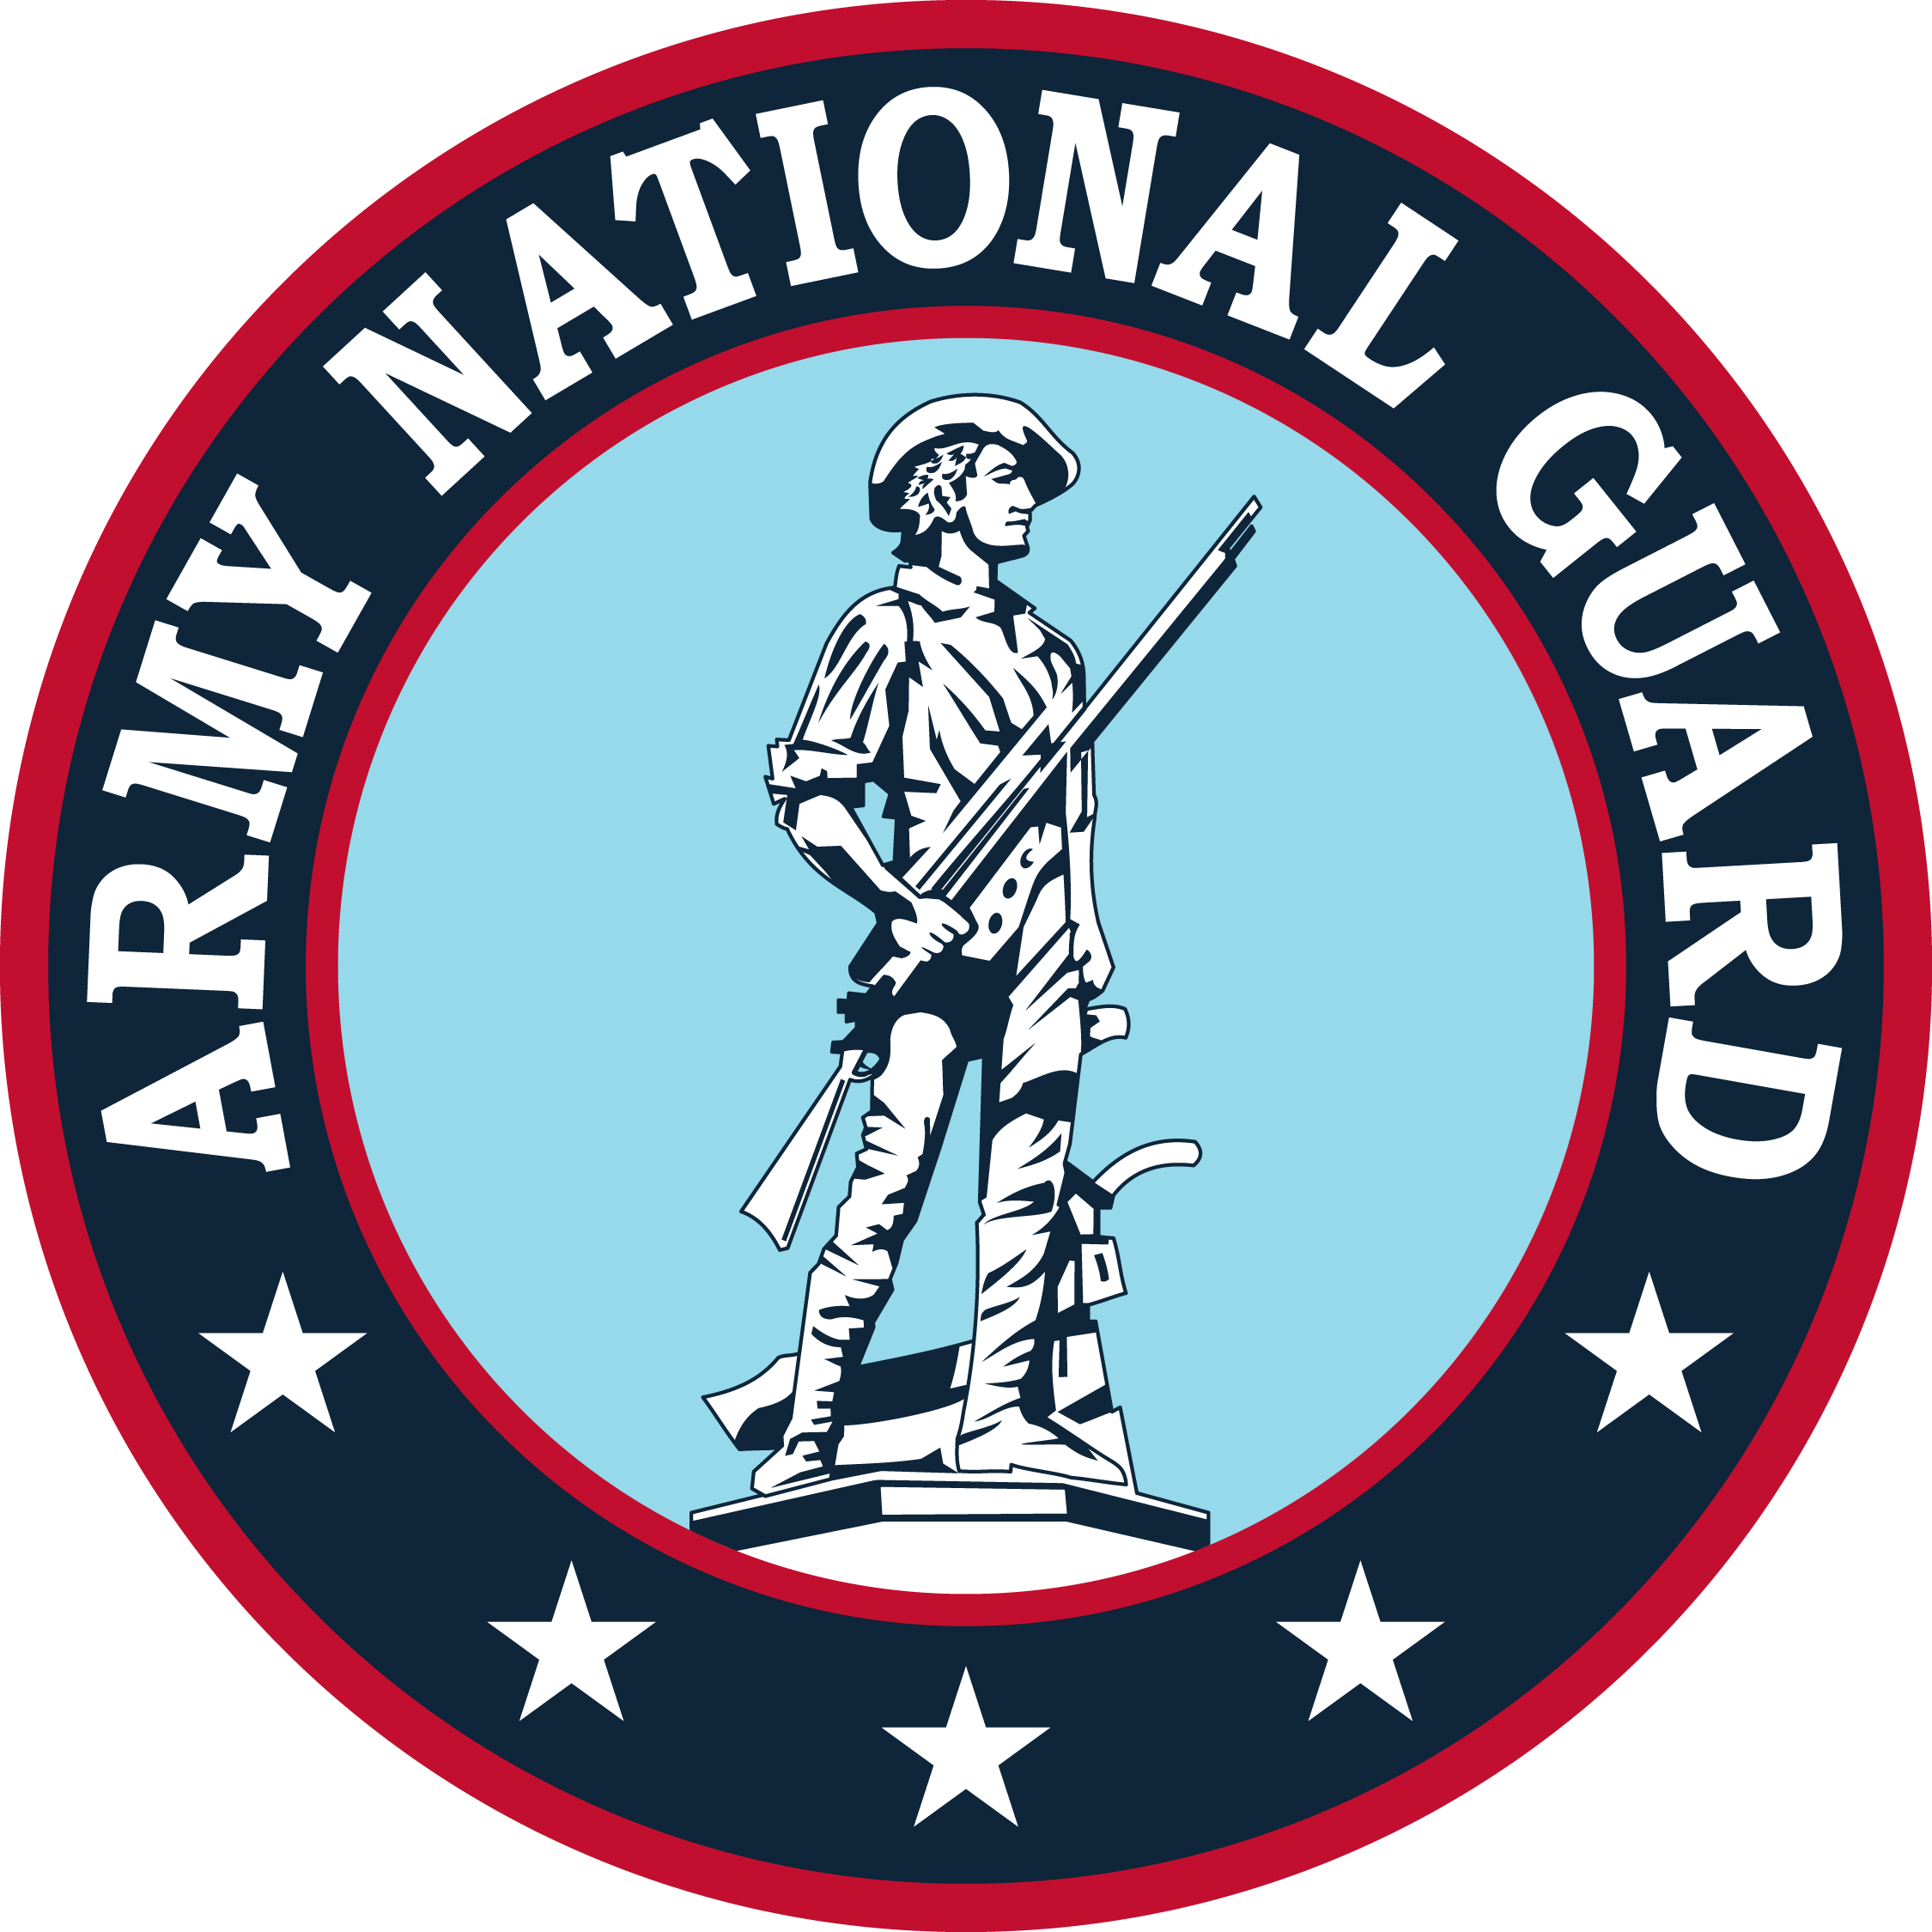 Wisconsin National Guard ready to support state, Article